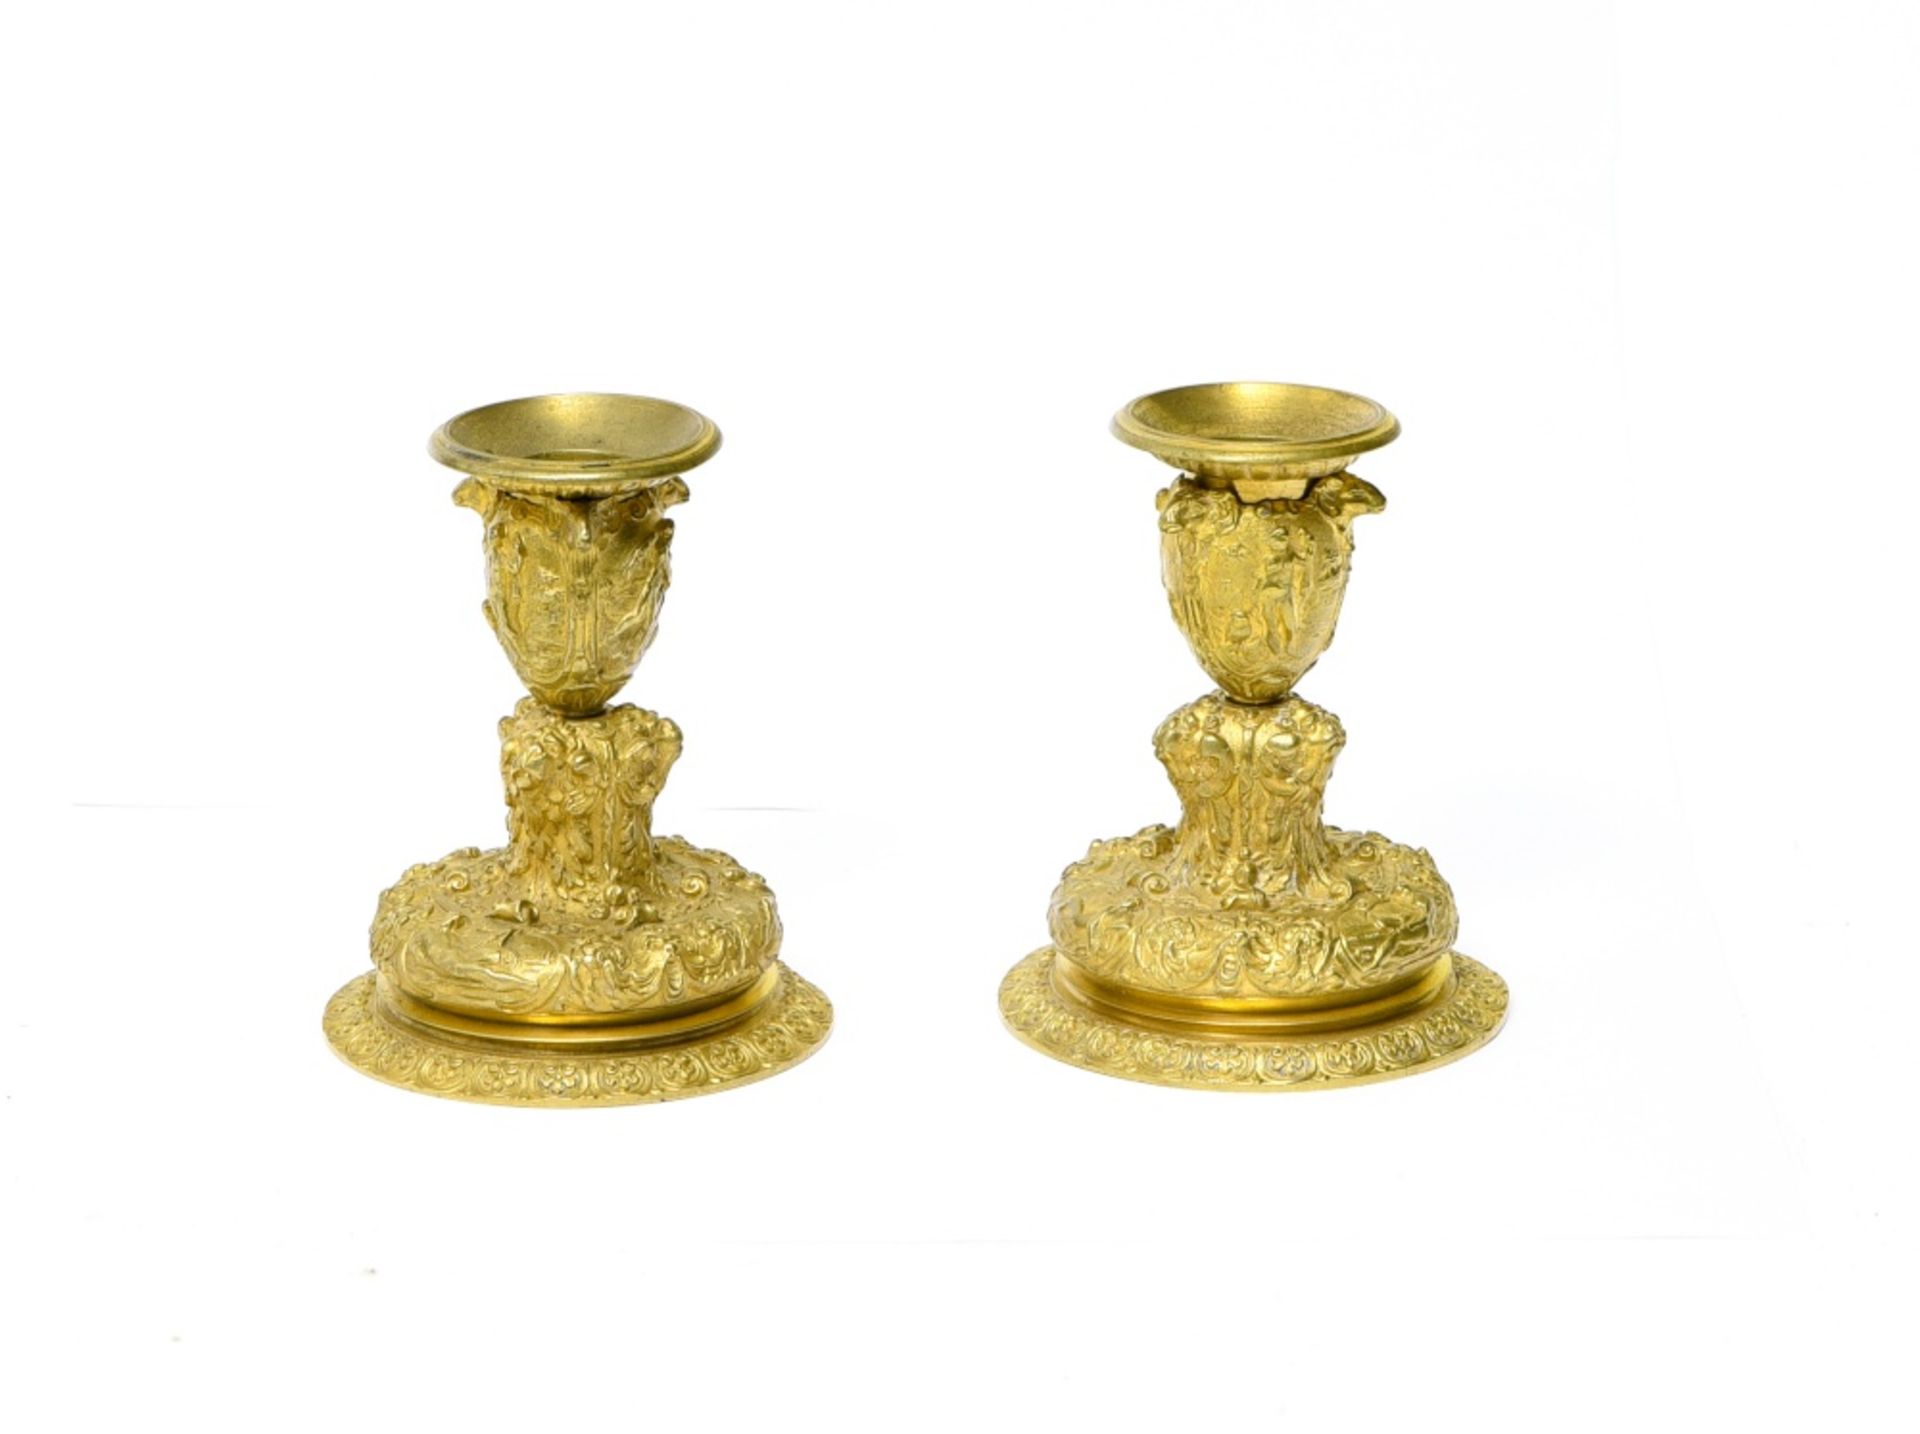 Pair of candlesticks featuring Greek gods, Bronze with golden patina, depicting the Greek gods